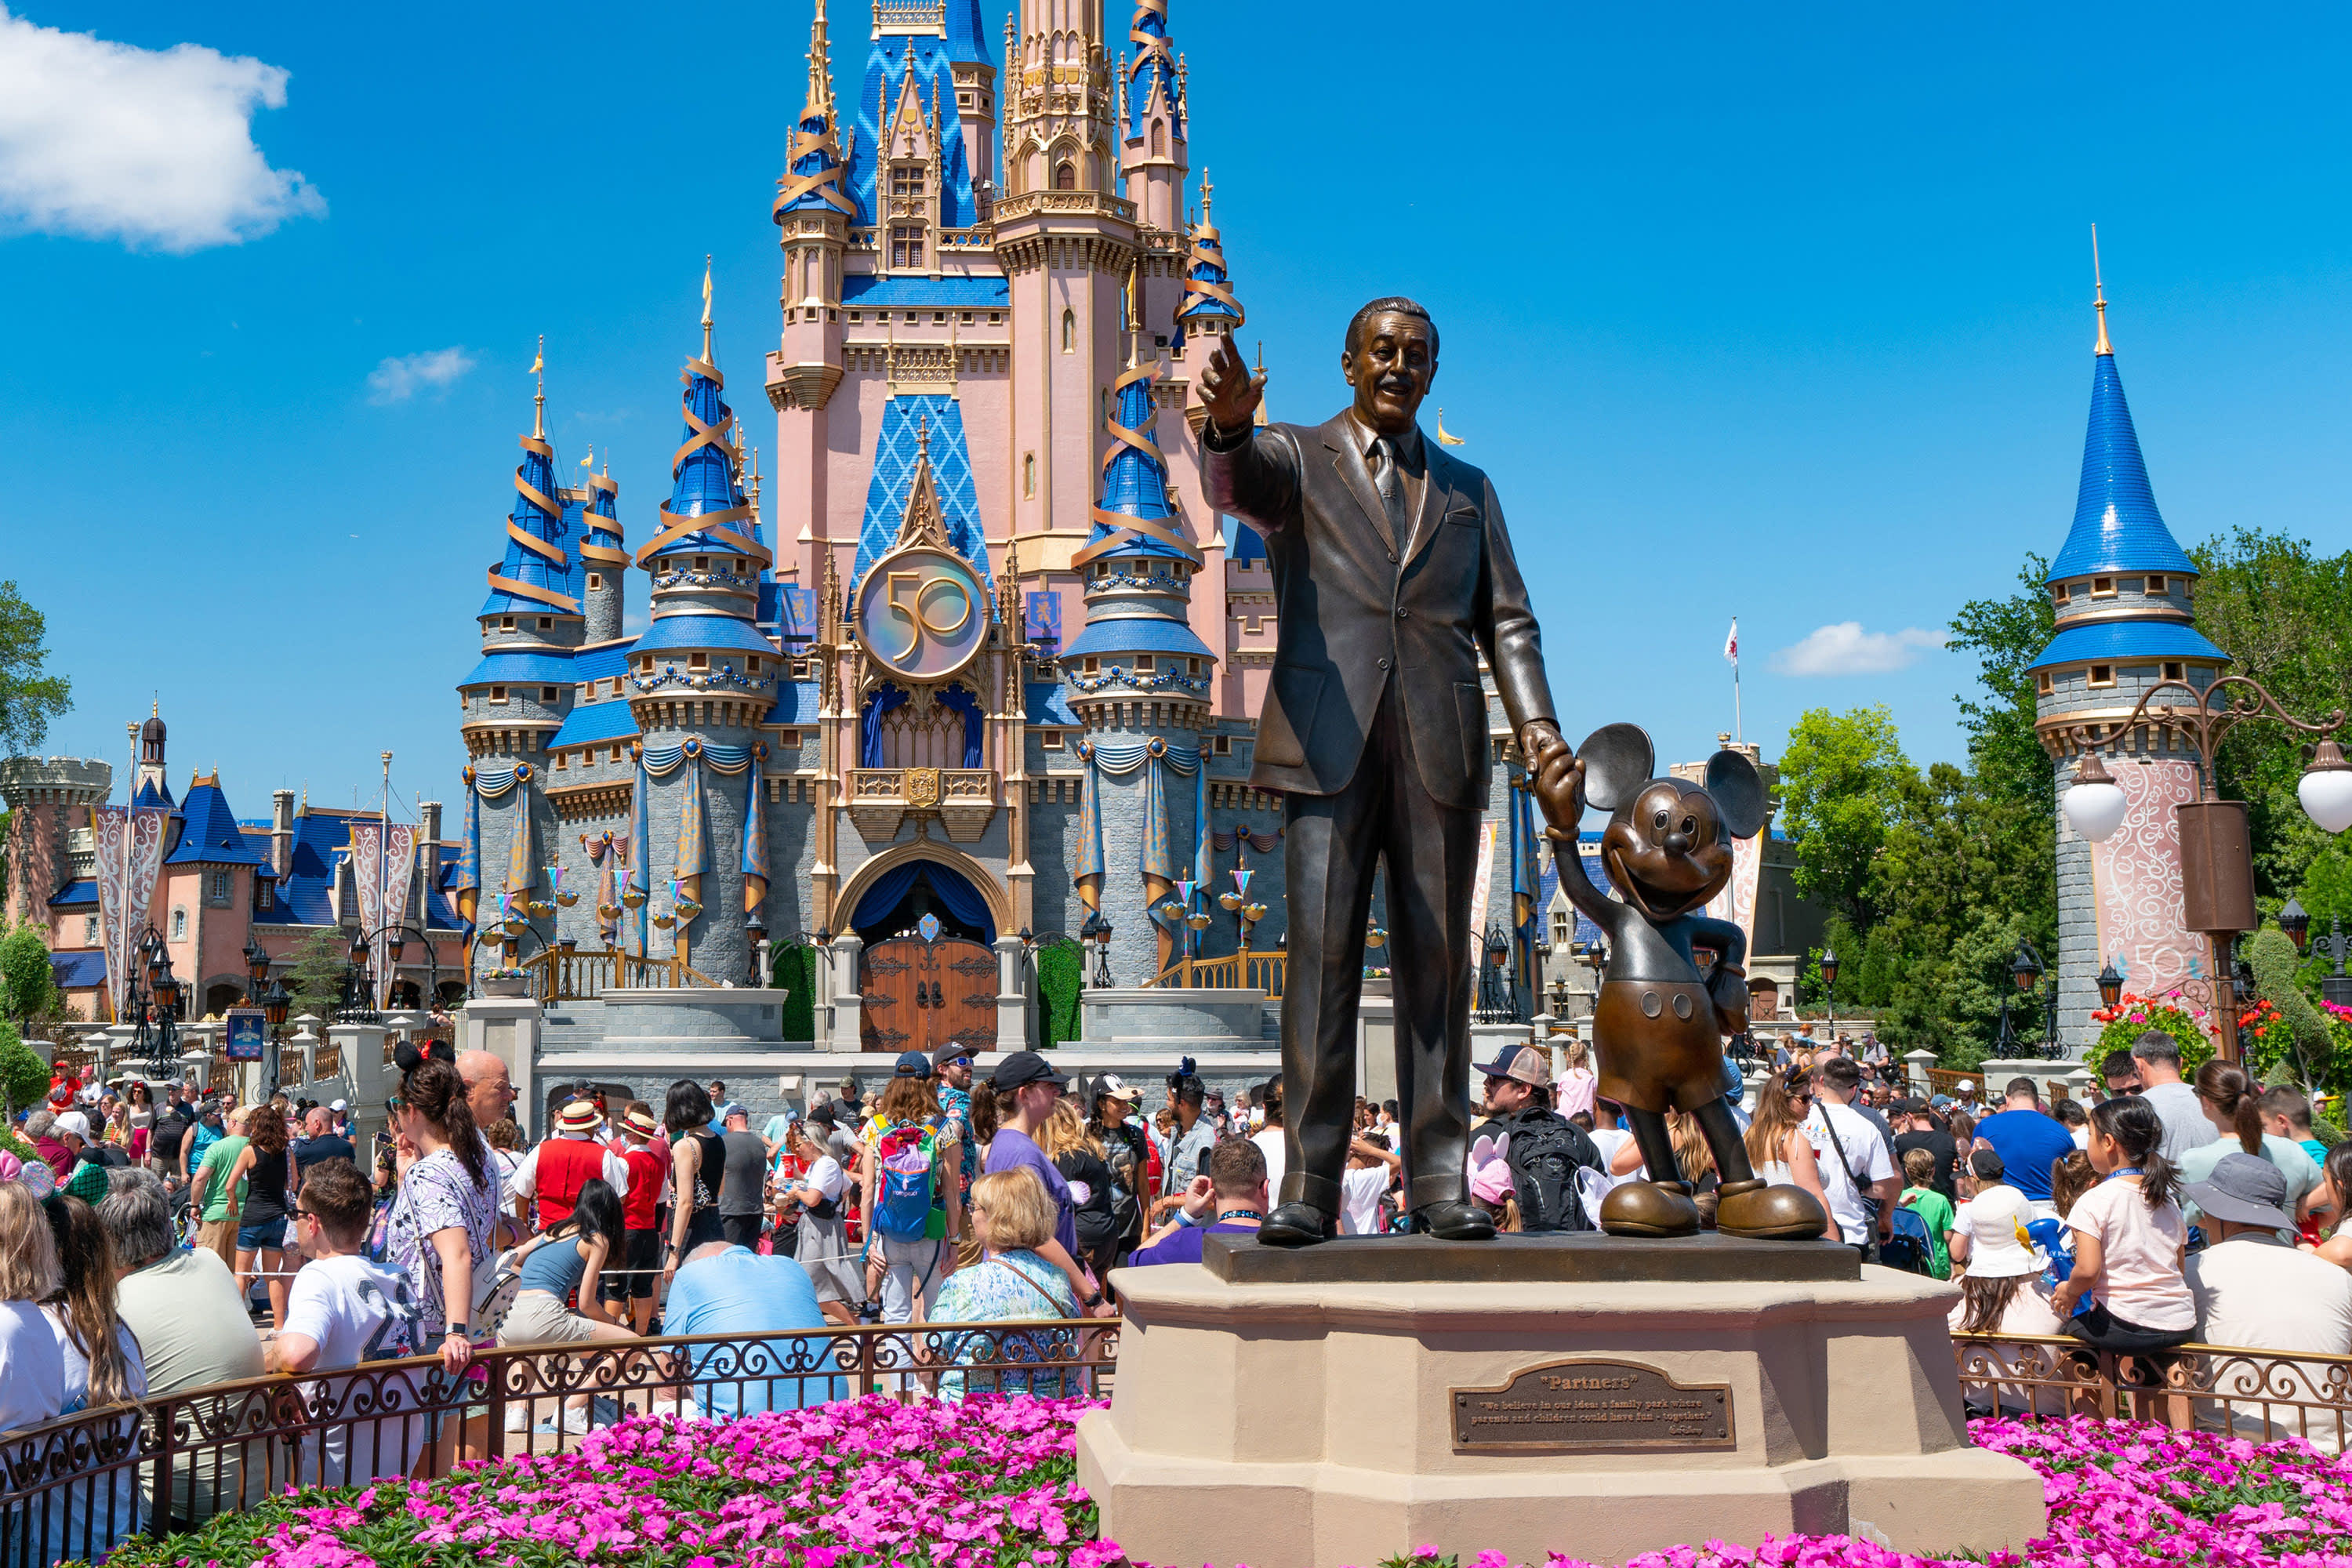 Disney to speed up and broaden its investments in parks and cruises sector